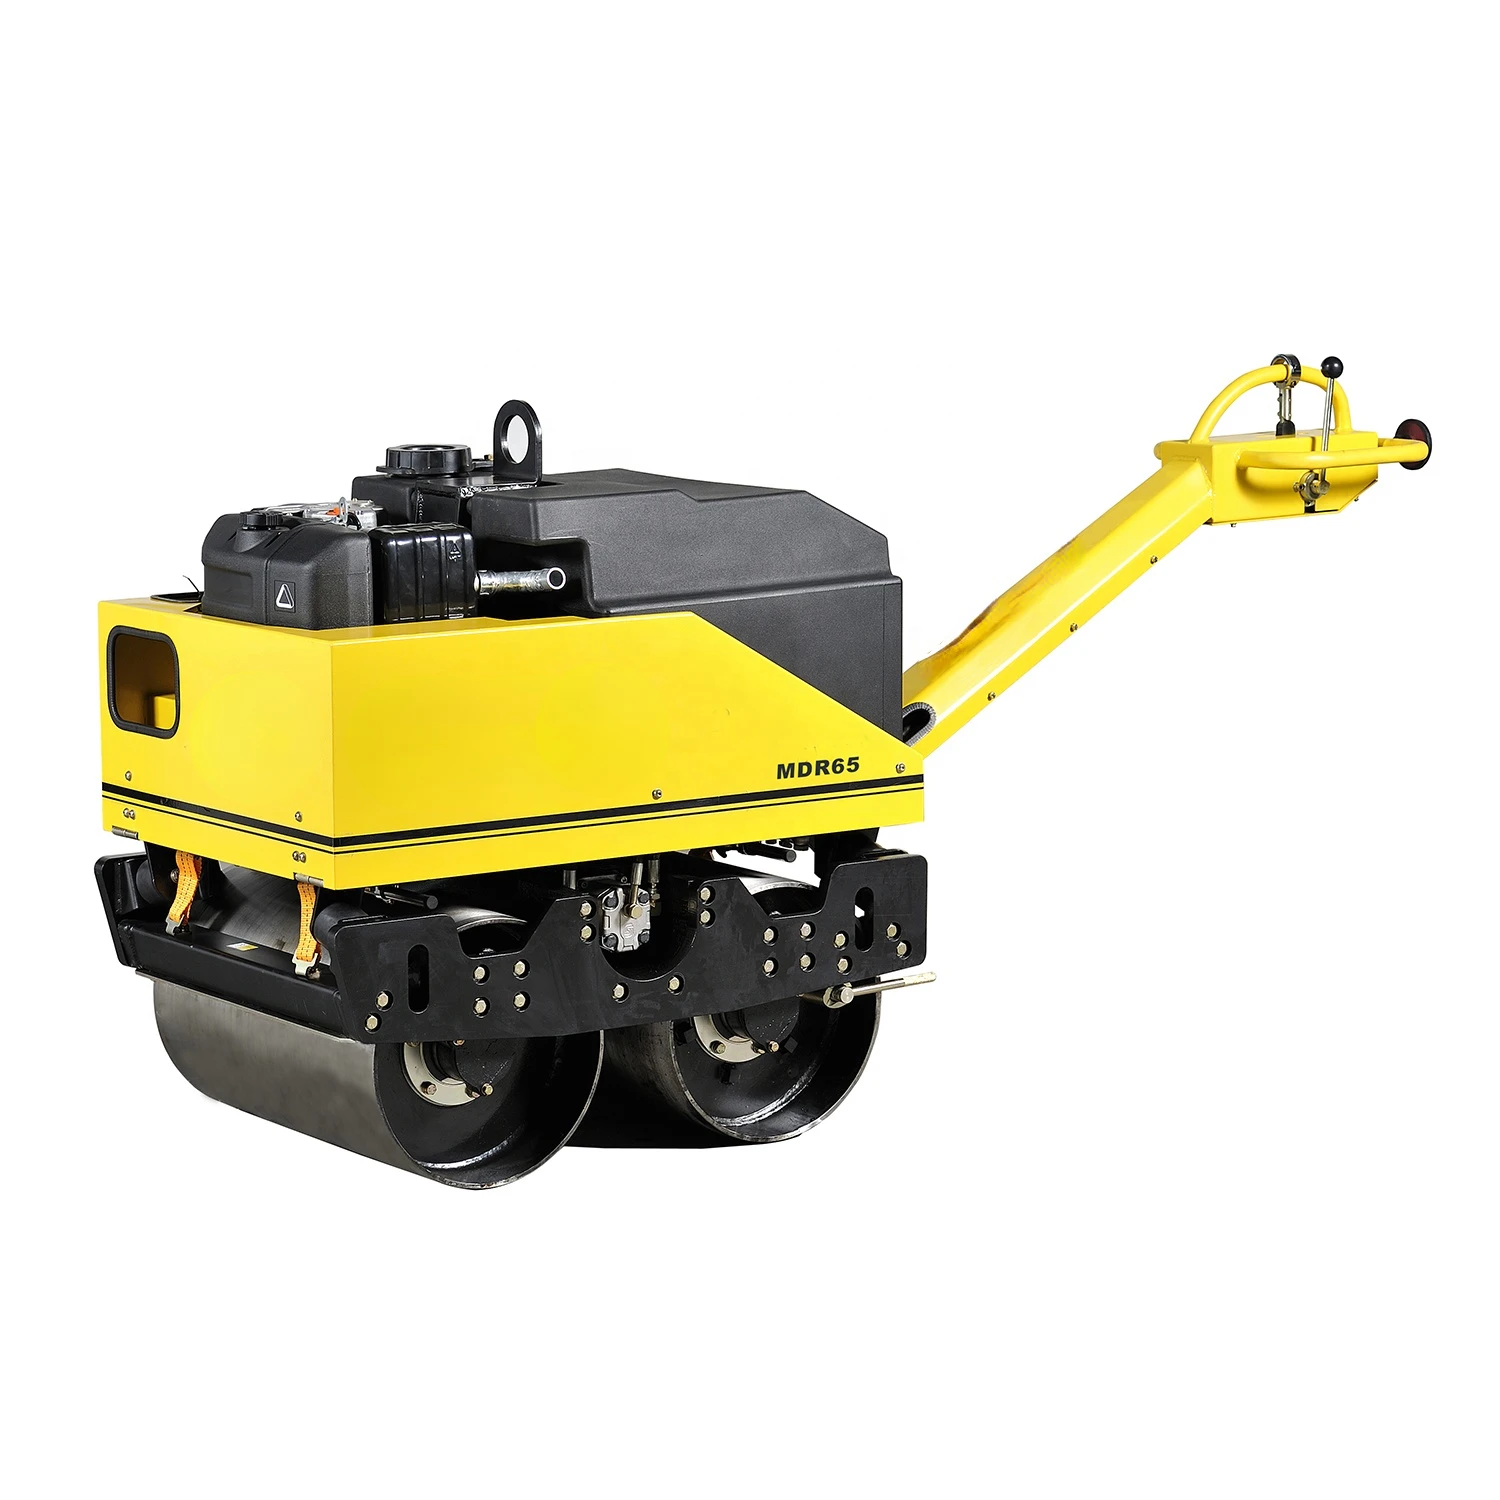 Smooth Roller Small Double Drum Asphalt Roller MDR65 EPA Double Drum Vibrating Steel Accept by Vibrator Roller Engine